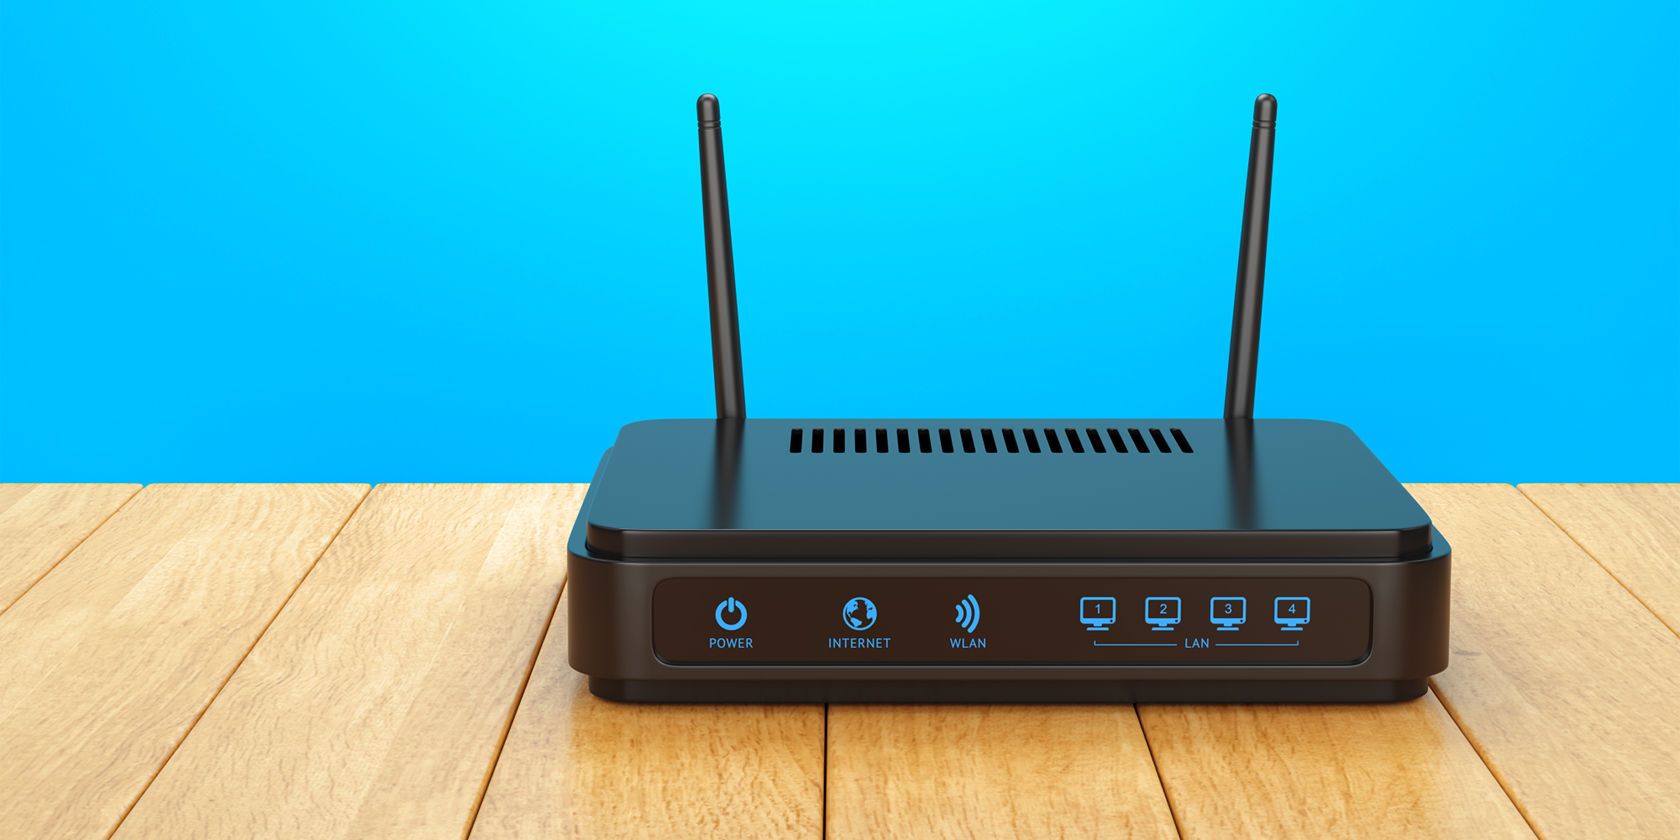 gaming router and modem